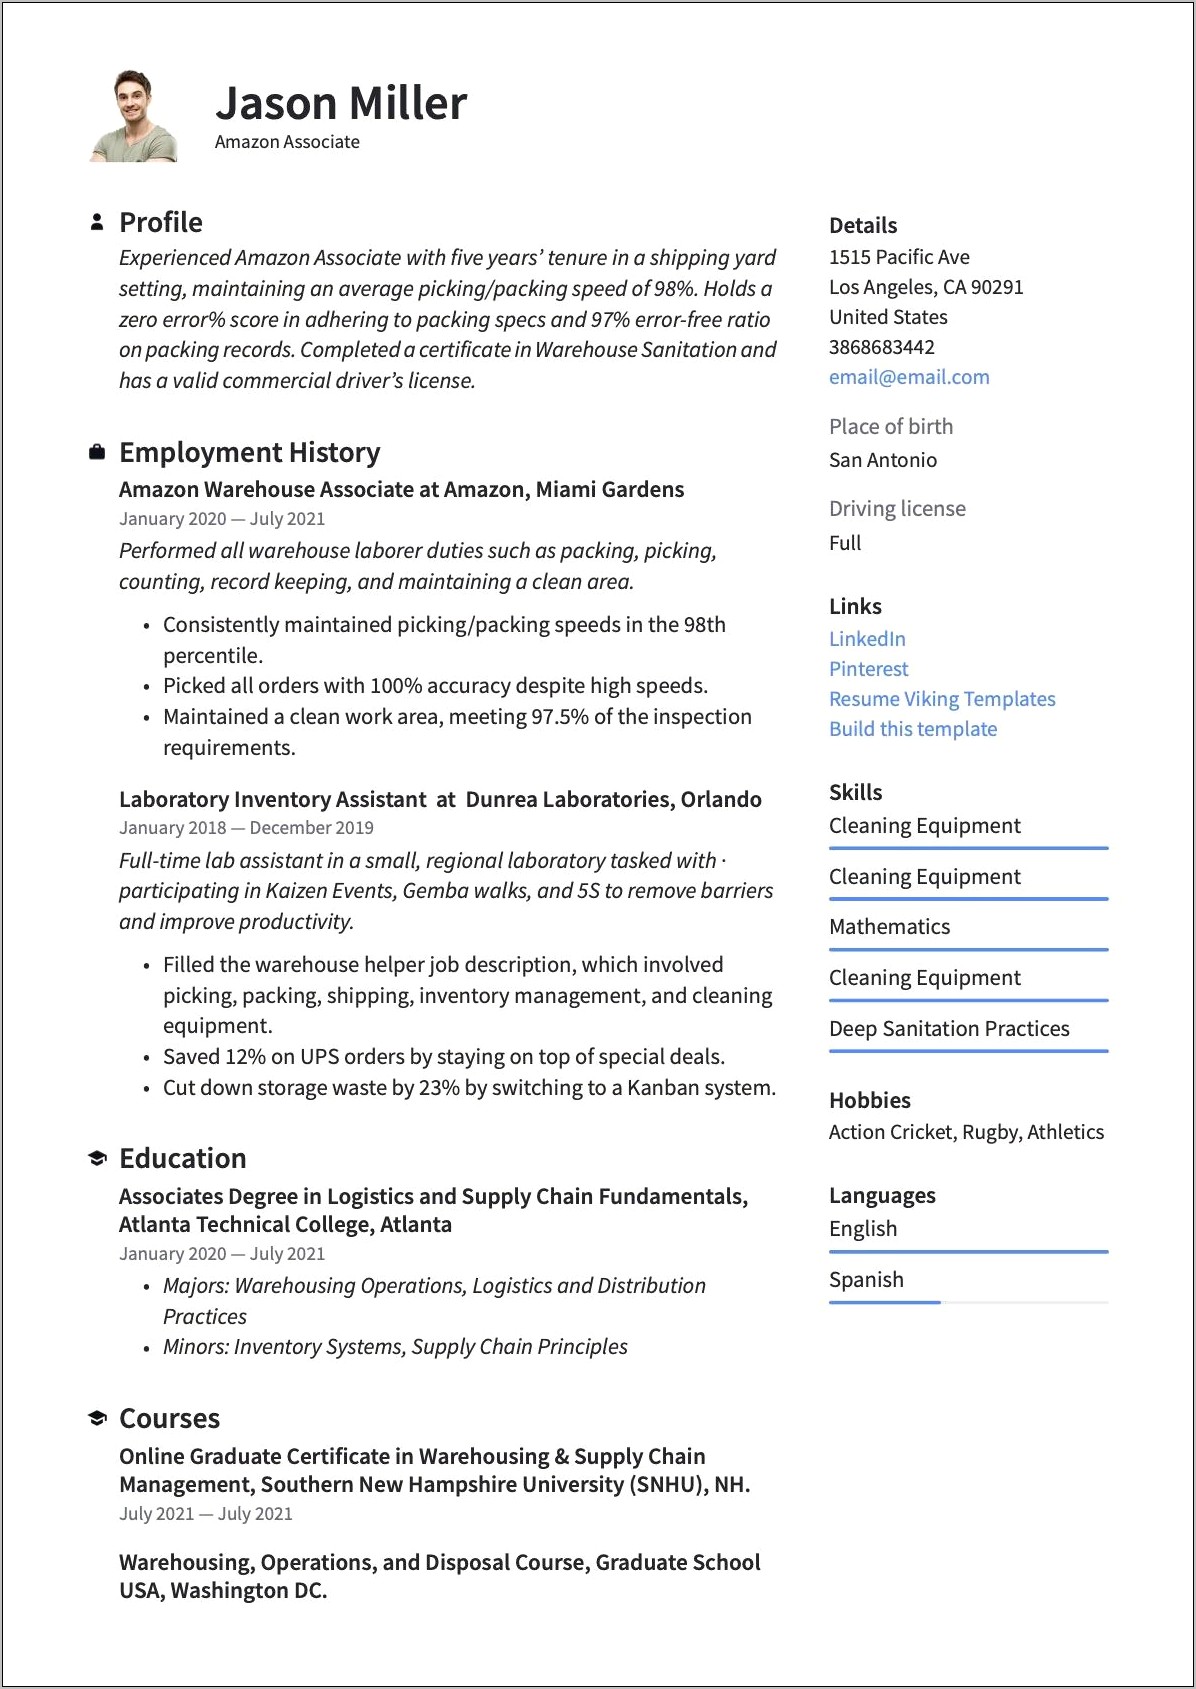 Best Resume Format For Amazon